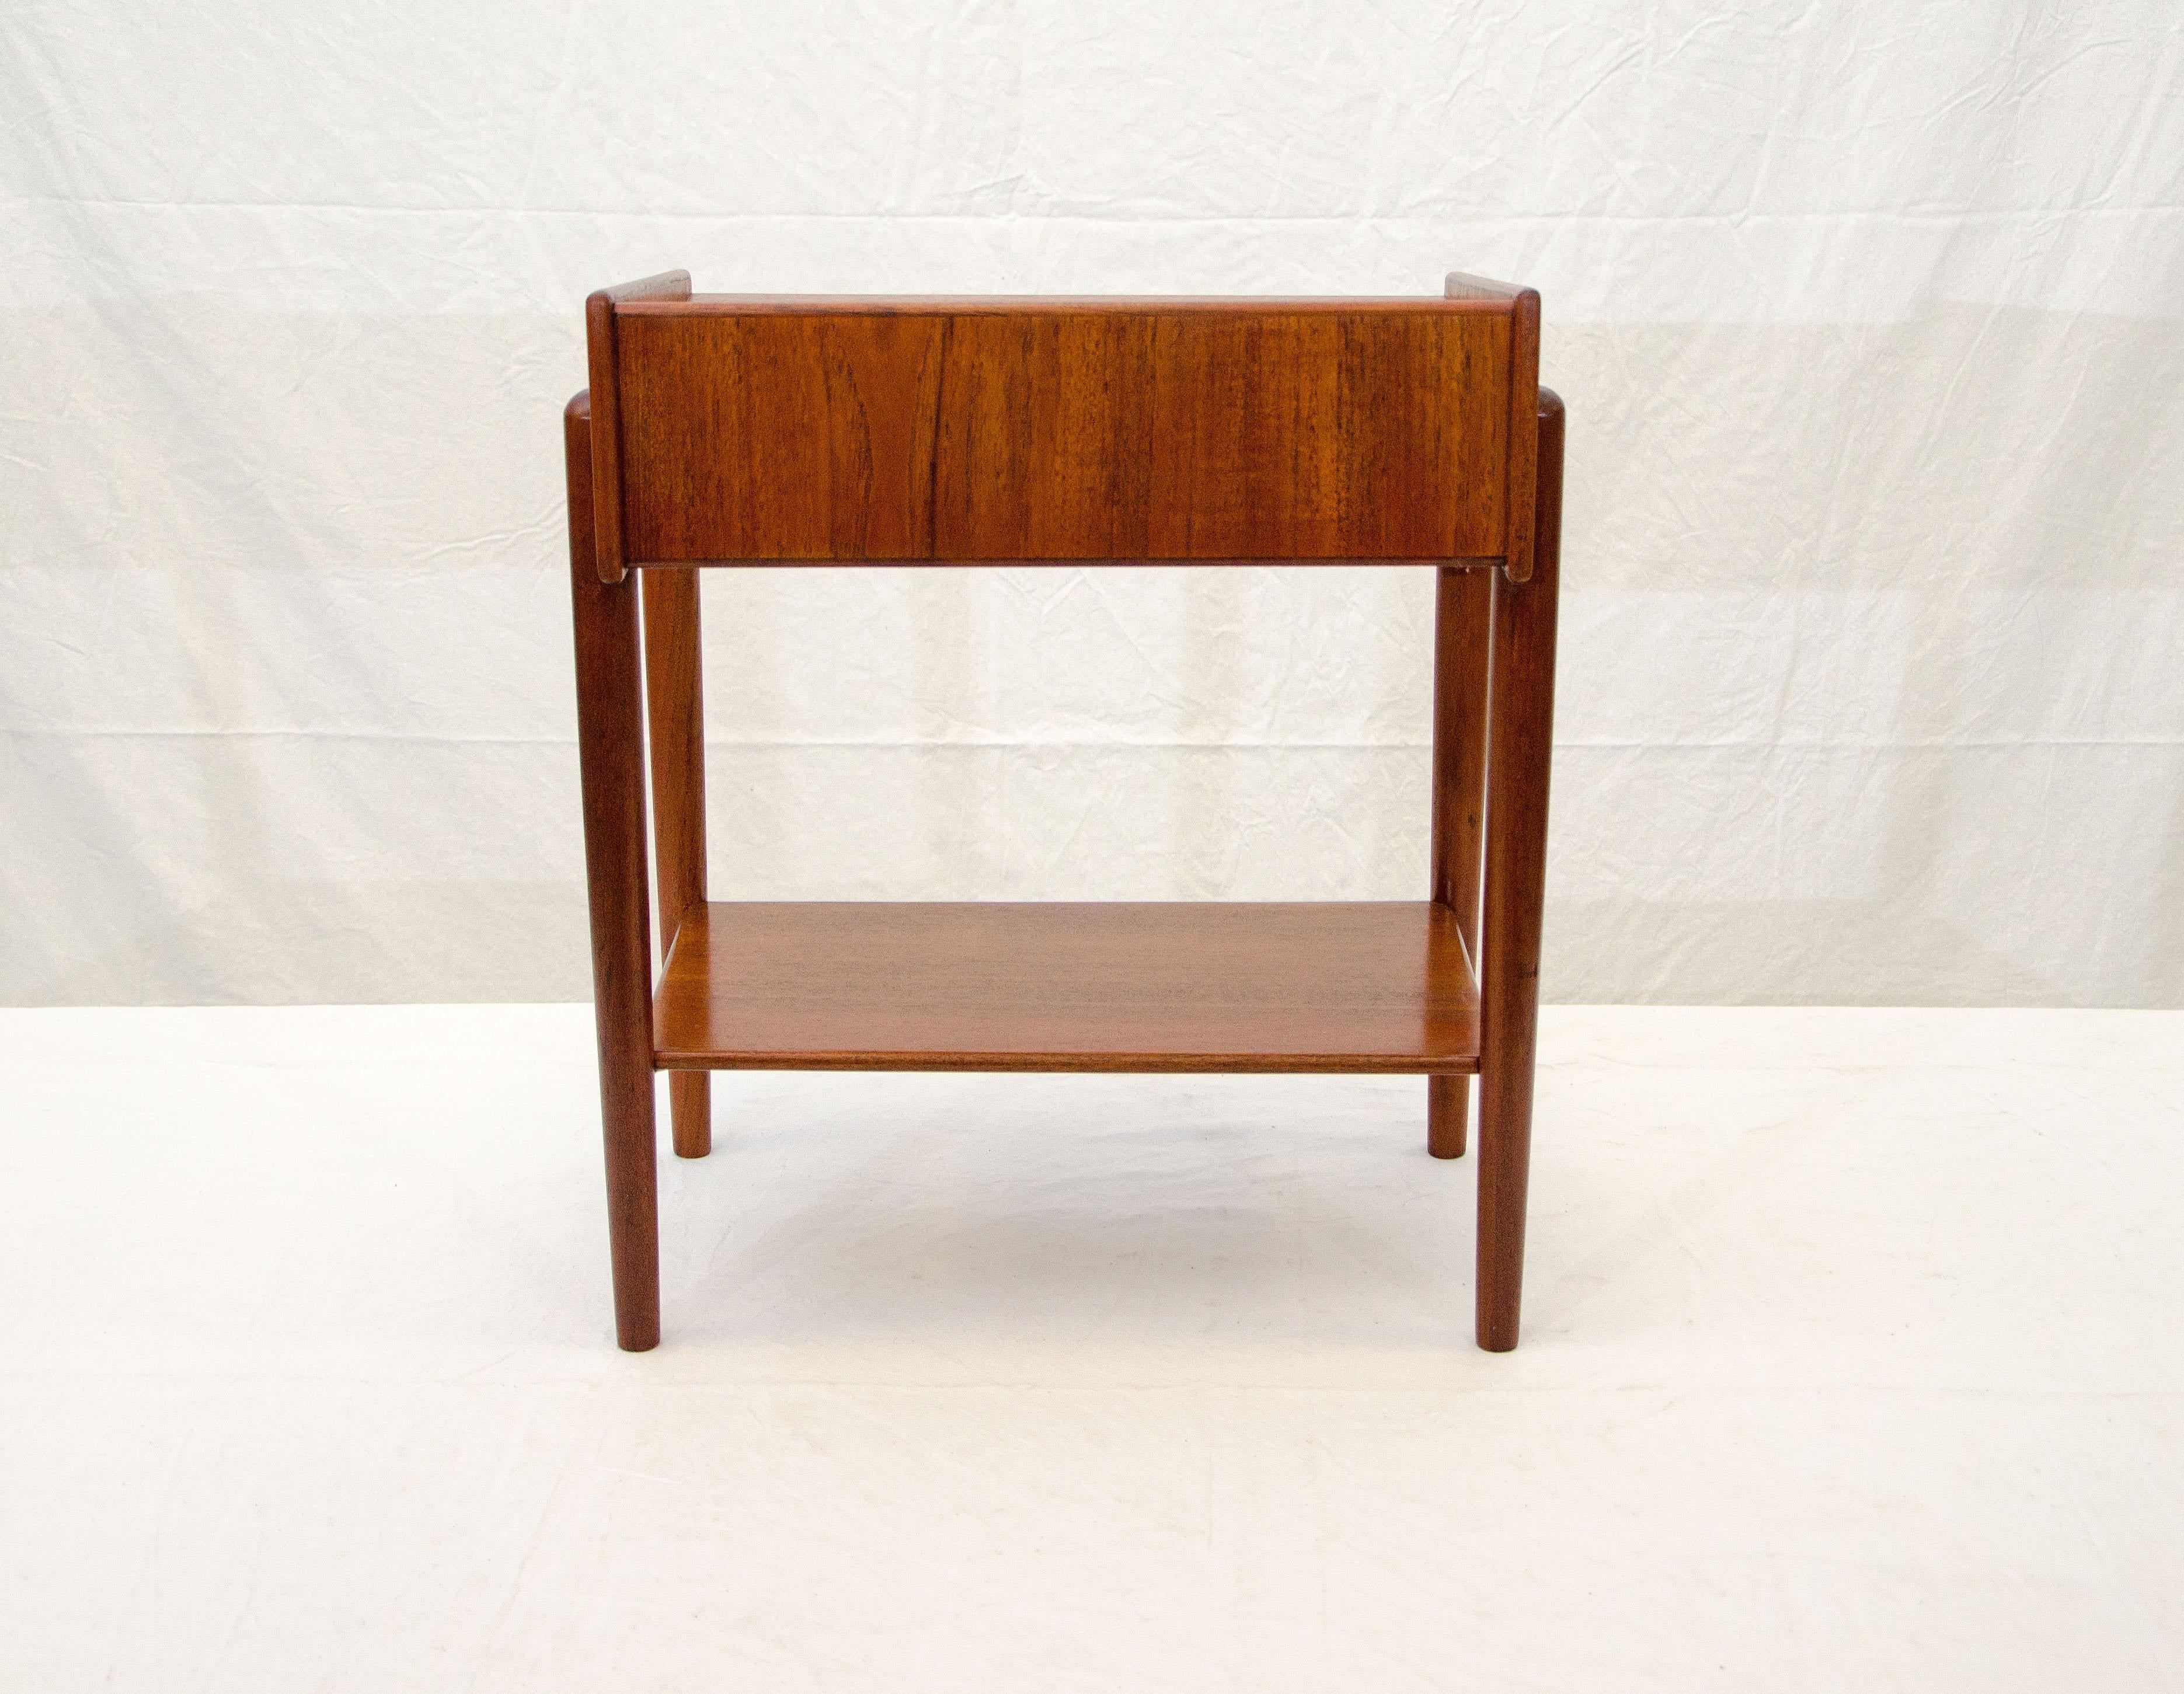 20th Century Small Danish Teak Nightstand or End Table